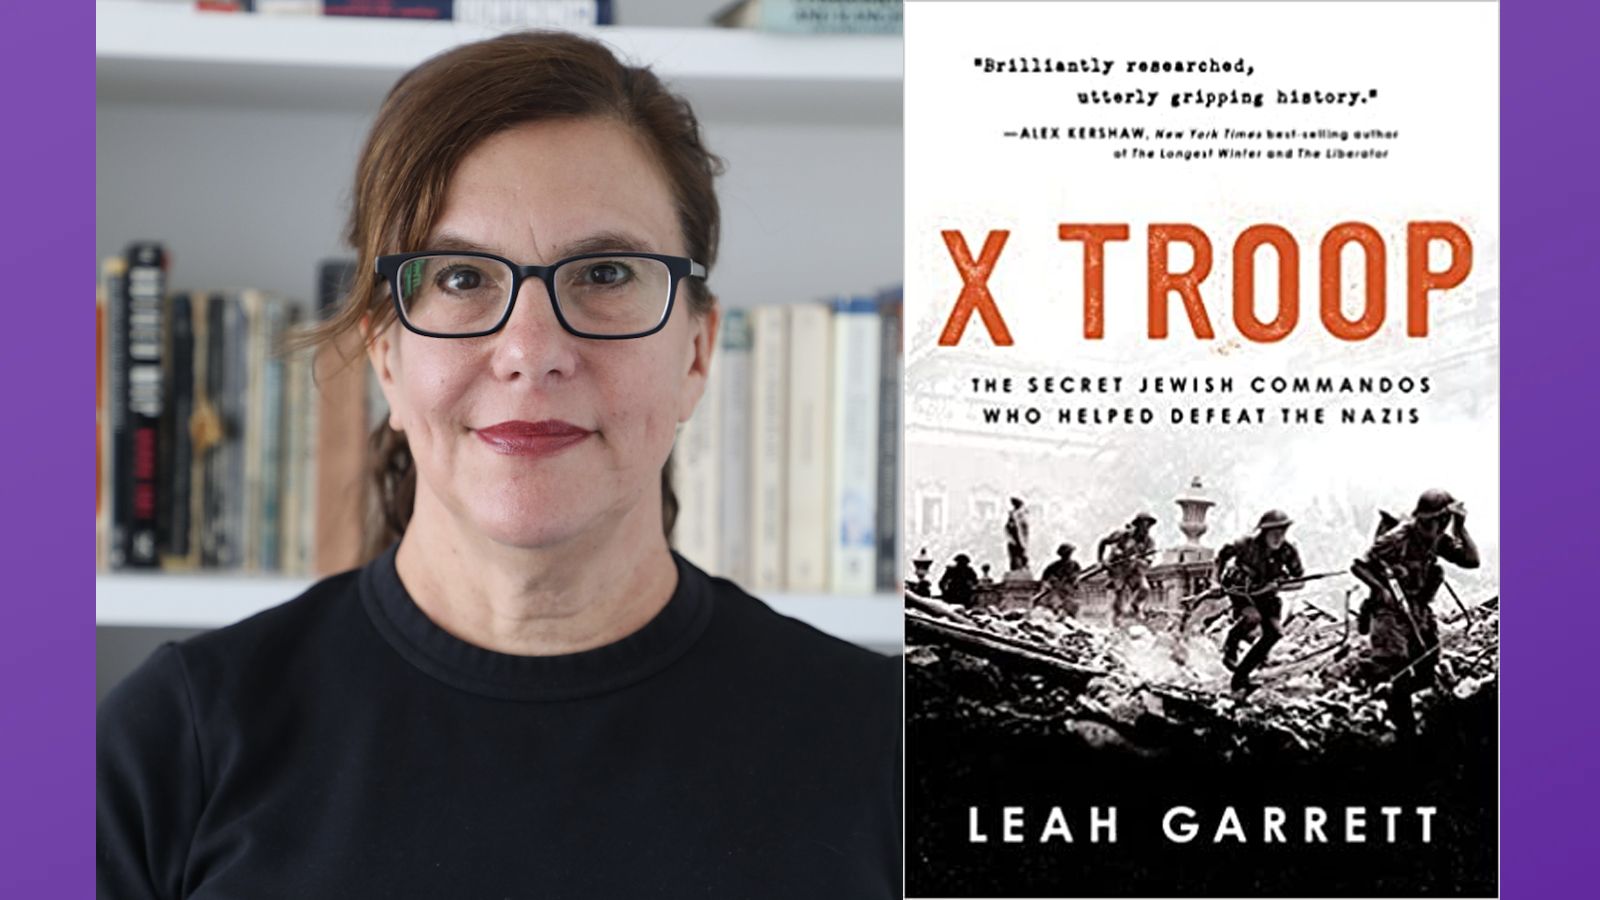 Leah Garrett and book cover for the book X-troop